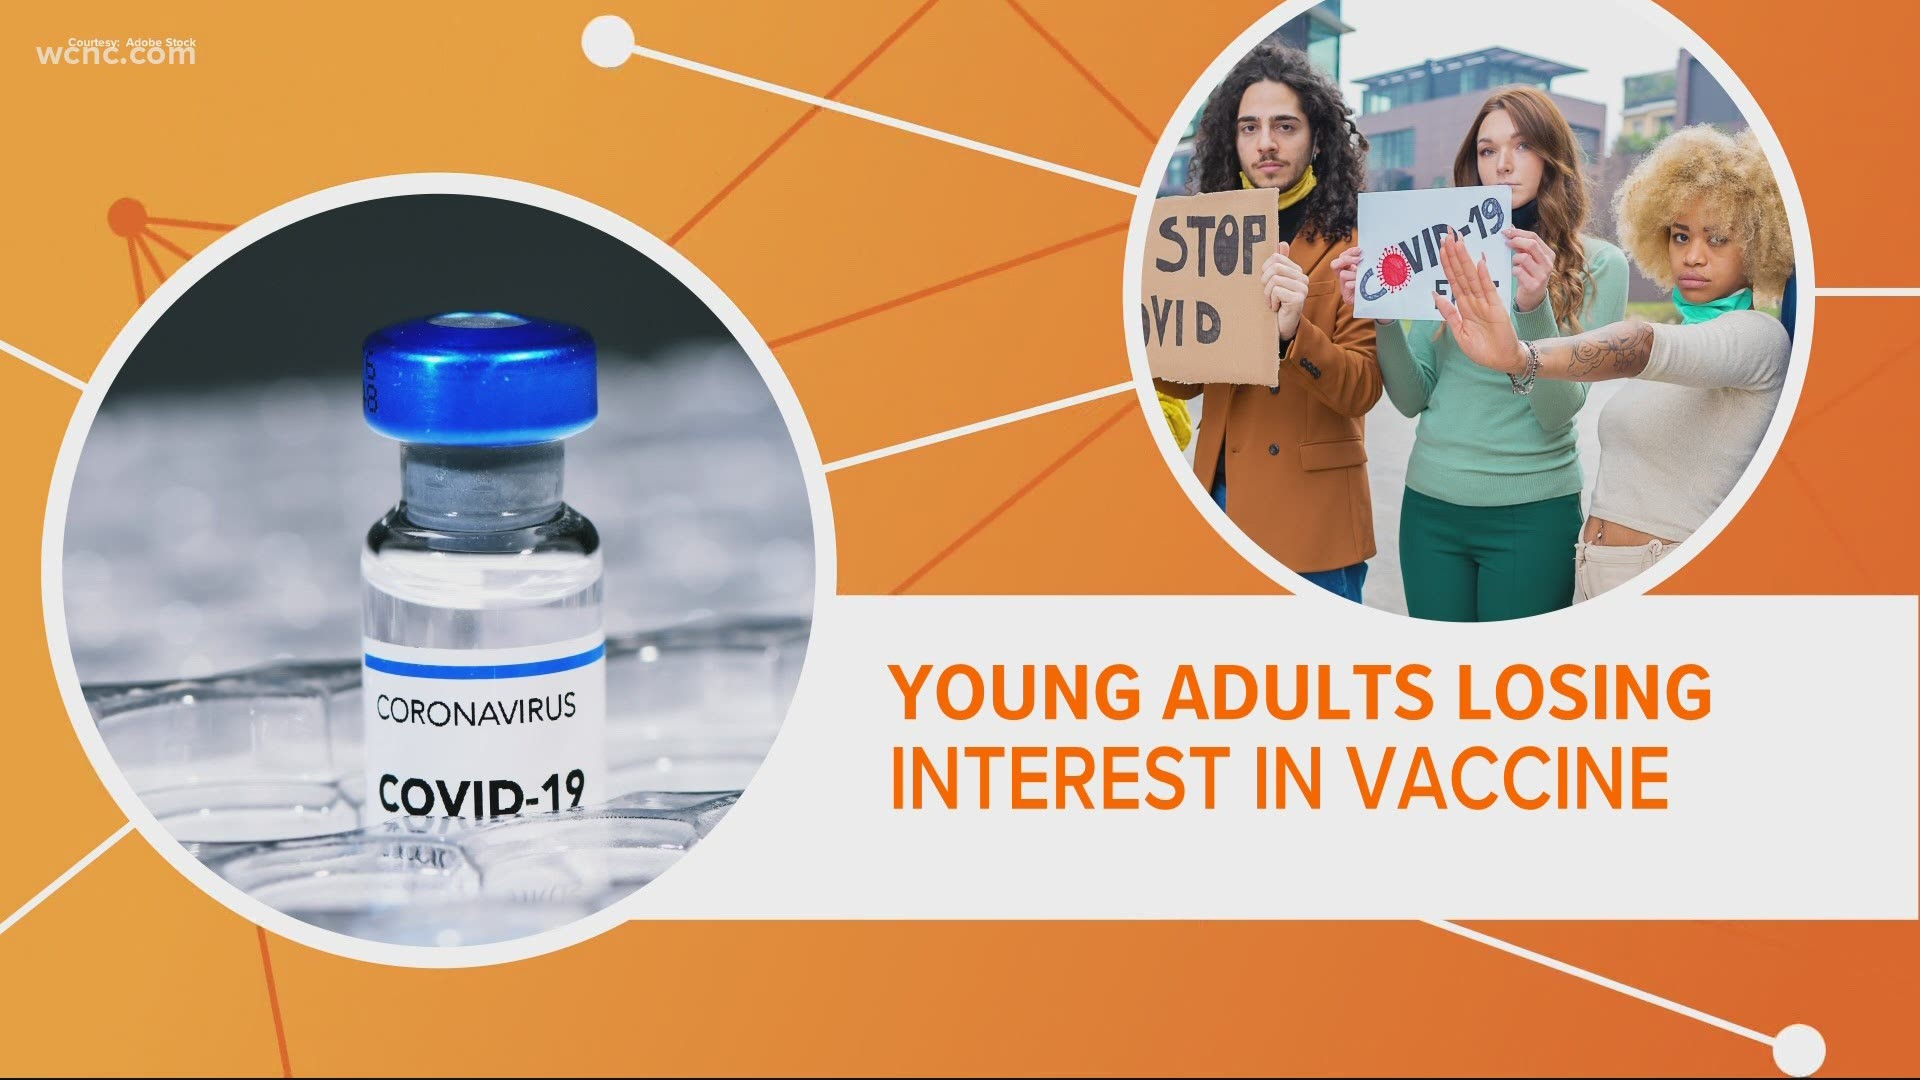 The COVID-19 vaccine will be available to everyone in North Carolina this week, but Gen Z, people who are 25 and under, may not be signing up right away.